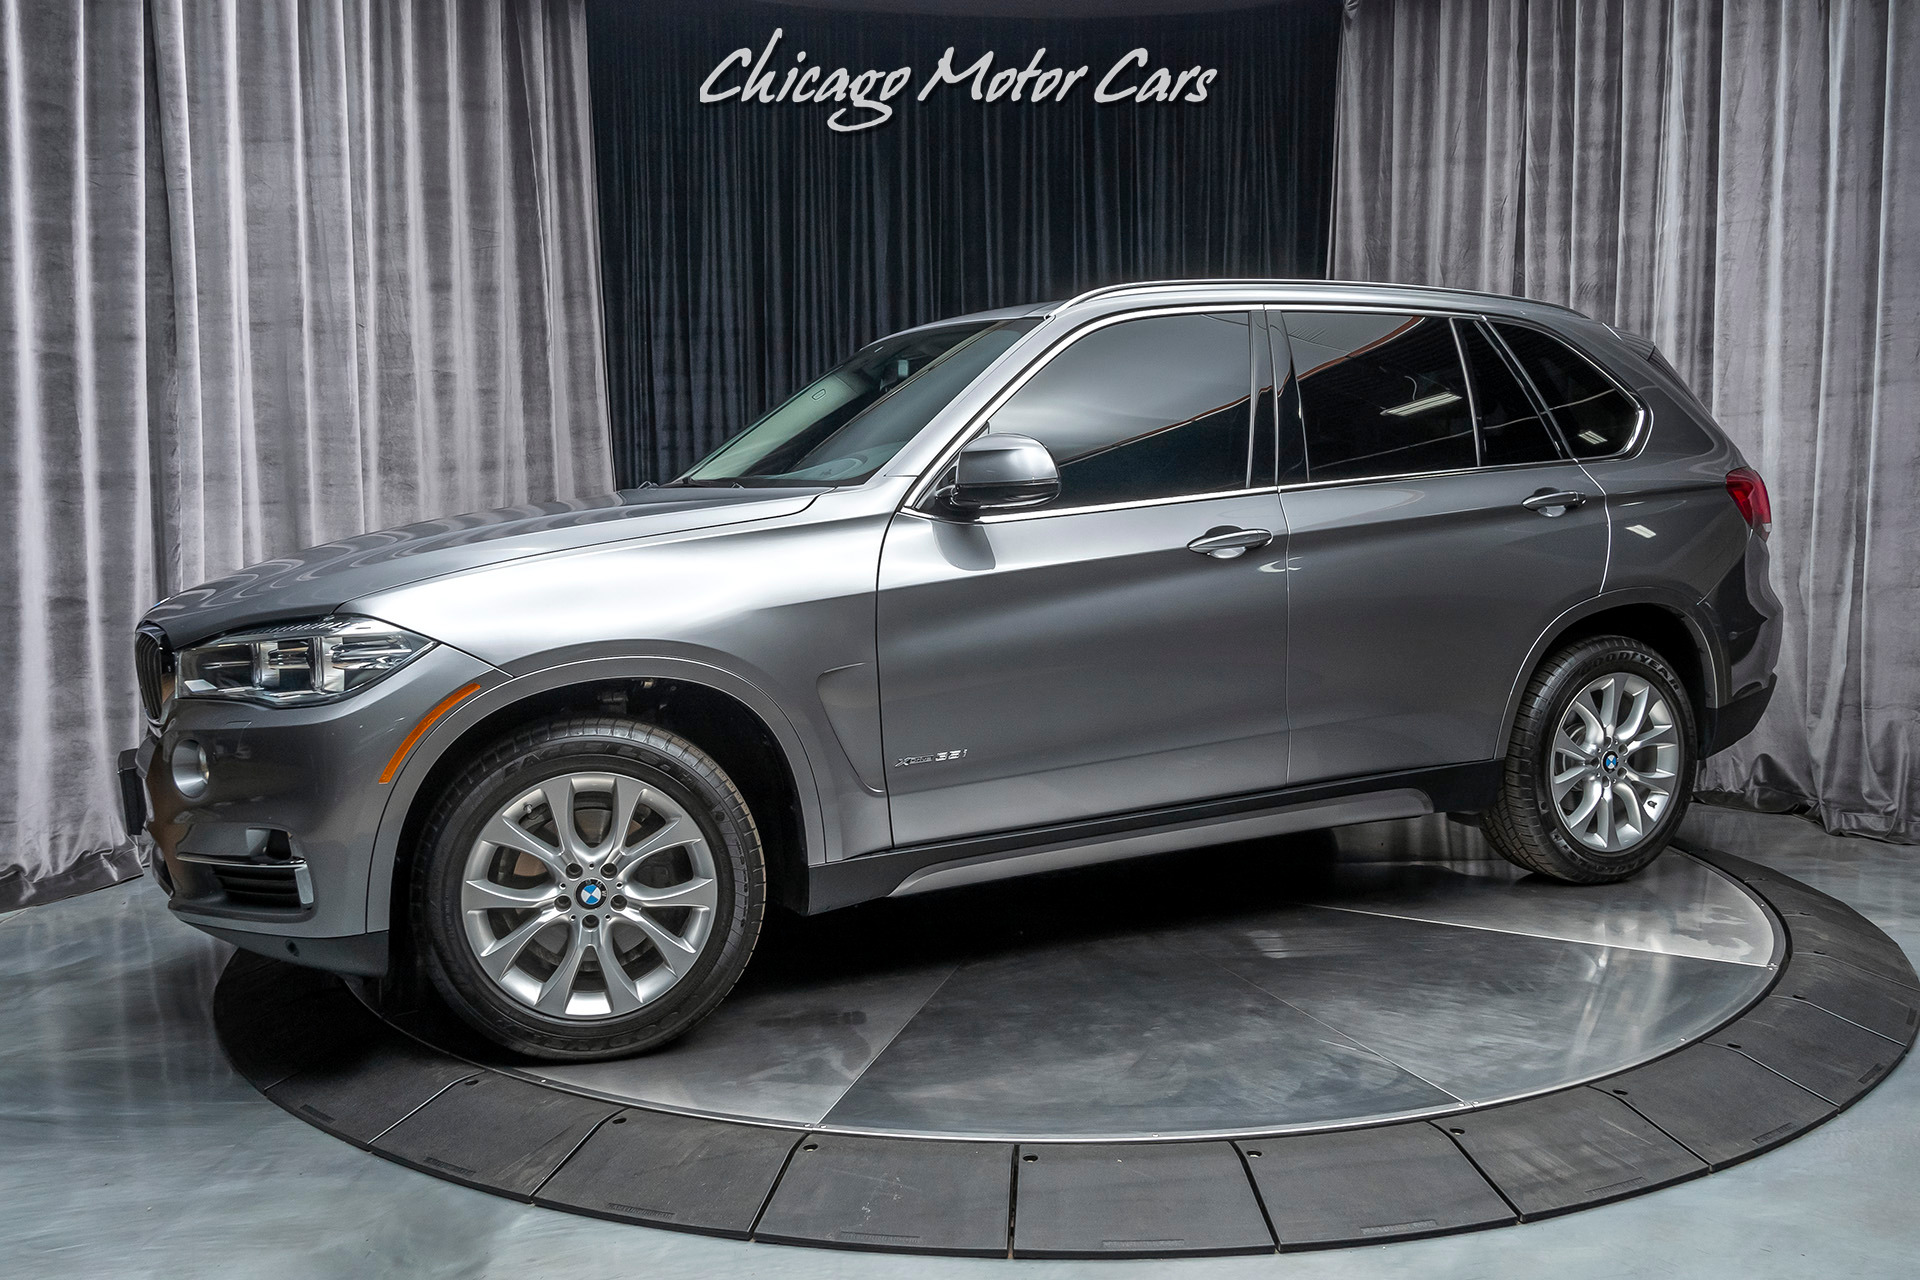 Used 2014 BMW X5 xDrive35i SUV MSRP $65K+ PREMIUM PACKAGE! For Sale